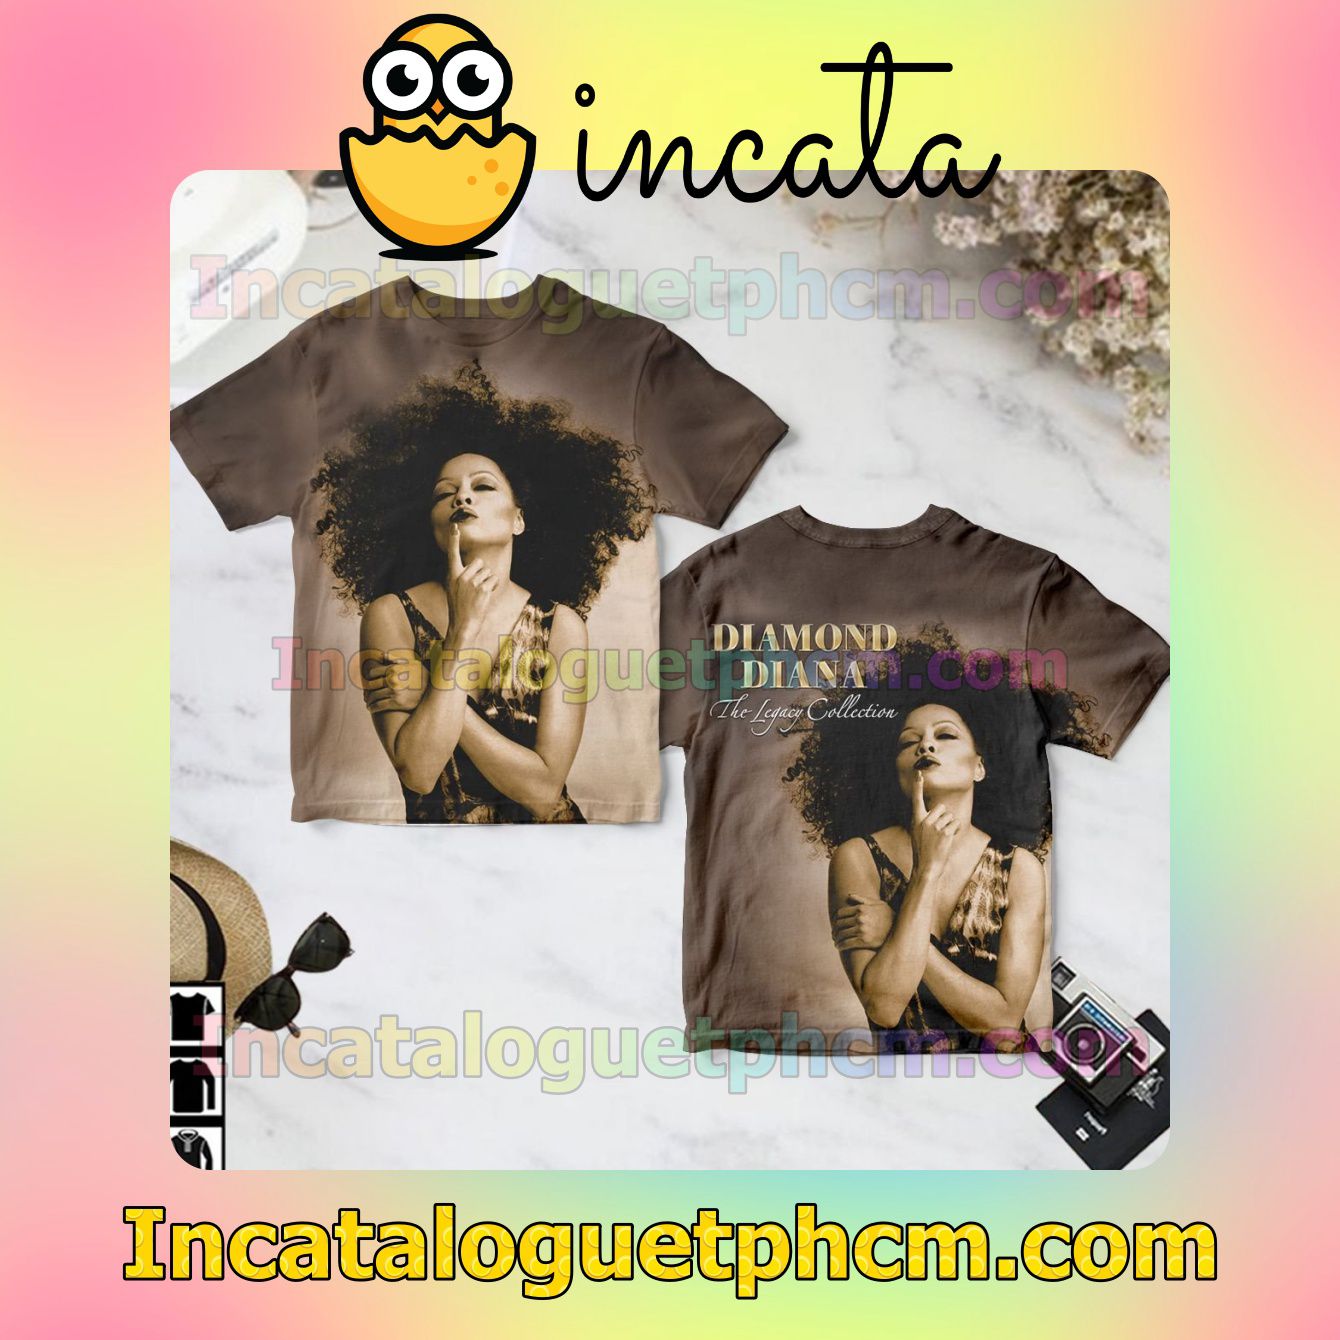 Diana Ross Diamond Diana The Legacy Collection Album Cover Gift Shirt